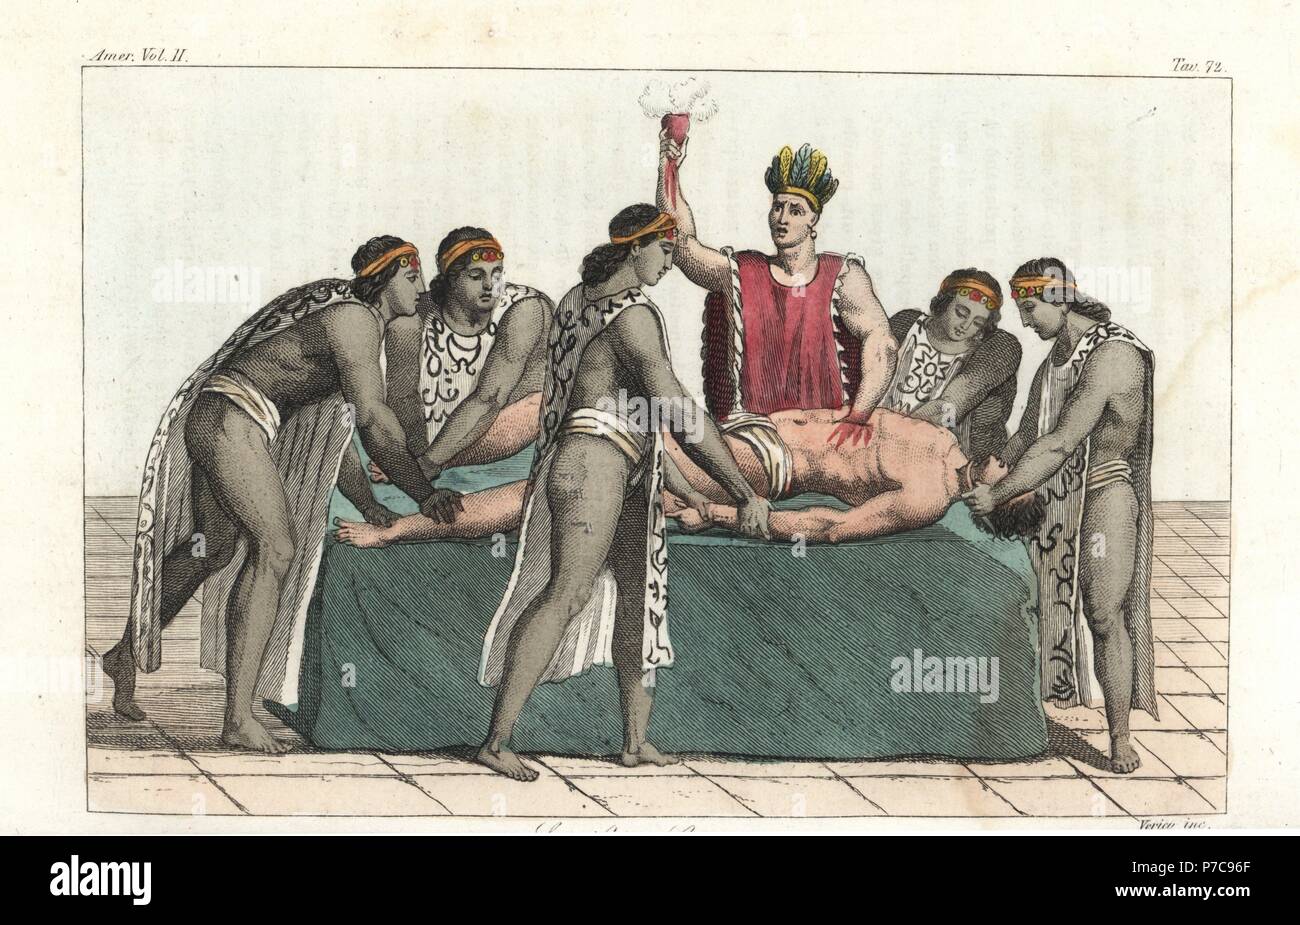 An Aztec priest removes a man's heart in a ritual with an obsidian knife on a sacrificial stone and offers it to the god Huitzilopochtli. Several young acolytes hold down the victim. Handcoloured copperplate engraving by Verico from Giulio Ferrario's Ancient and Modern Costumes of all the Peoples of the World, Florence, Italy, 1843. Stock Photo